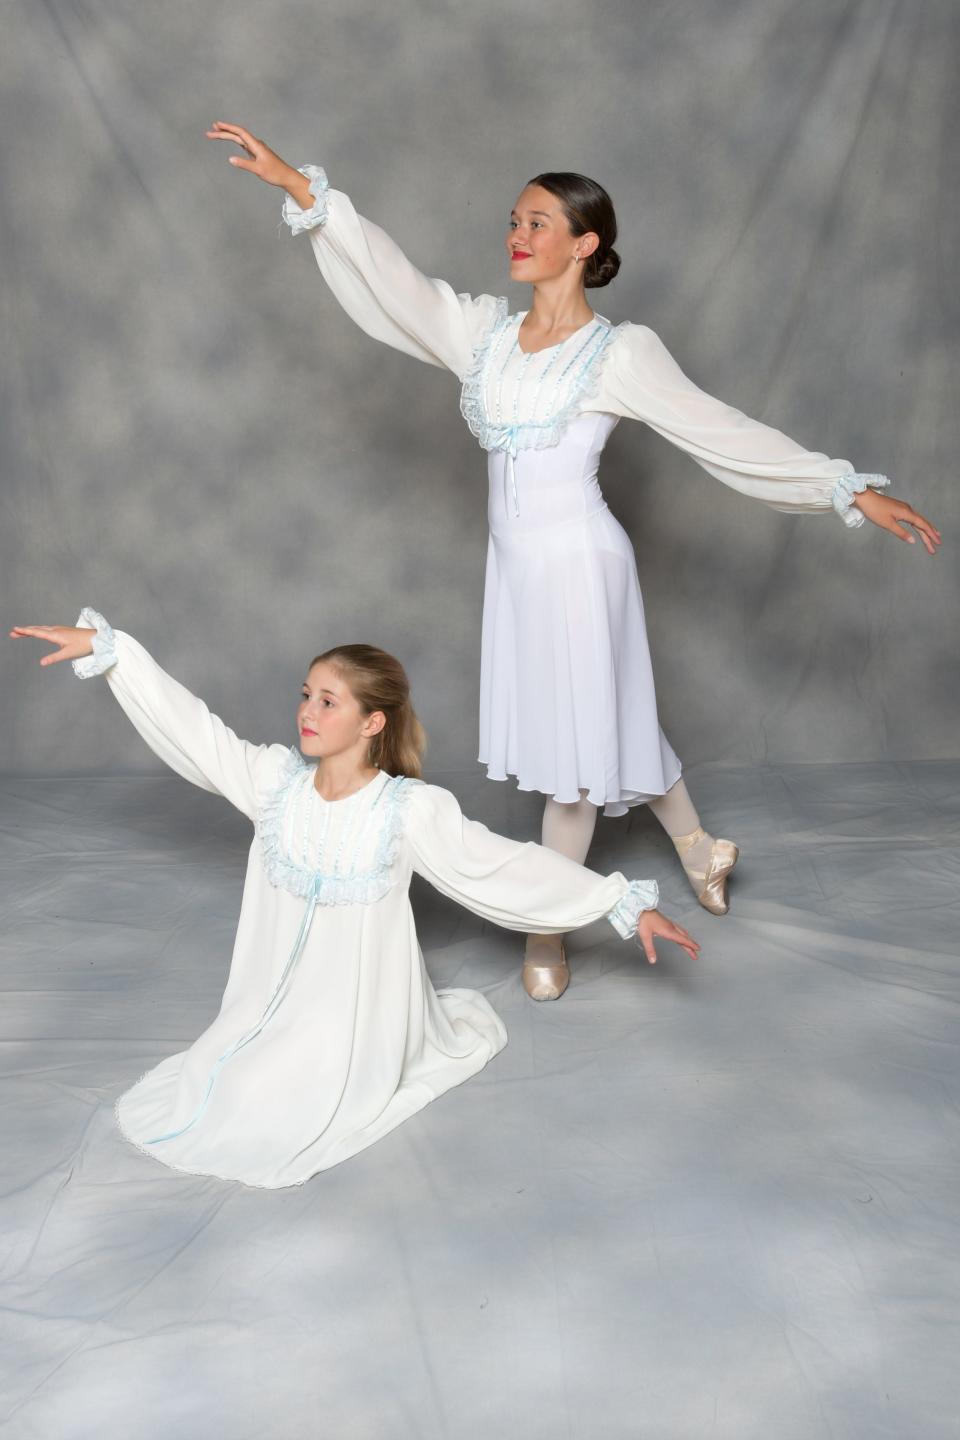 Richland Academy of the Arts will present "The Nutcracker Ballet" at 7 p.m. Friday and 2:30 and 7 p.m. Saturday, all at Shelby High School. Pictured here are Ava Irwin as older Clara and Piper Hilterman as younger Clara.